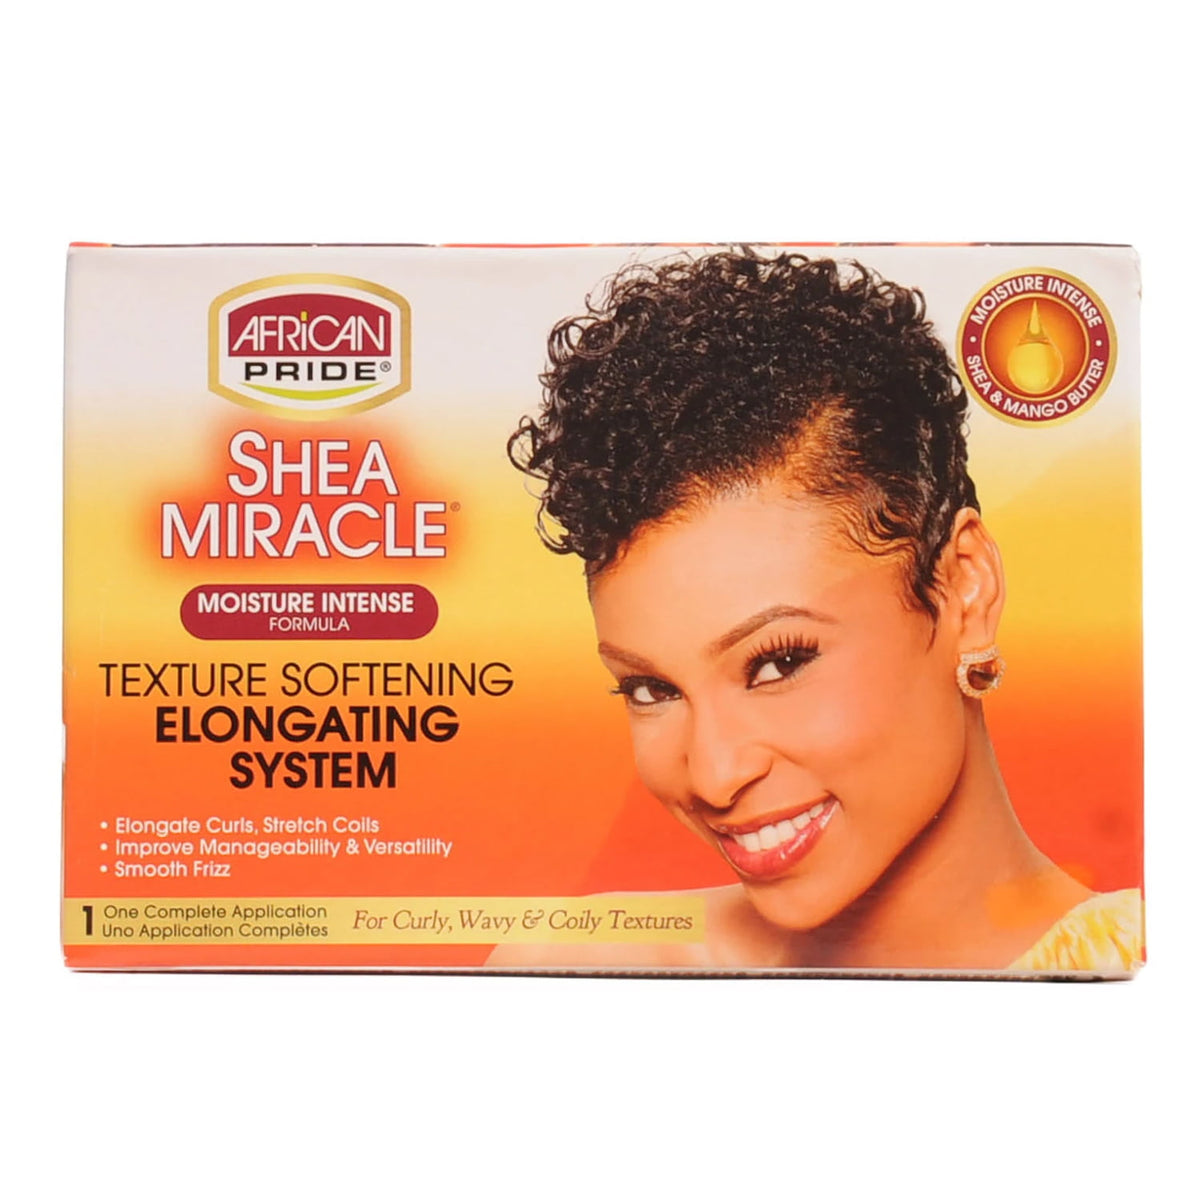 African Pride Shea Miracle Texture Softening Elongation System, Curly, Wavy & Coily - 1 Application